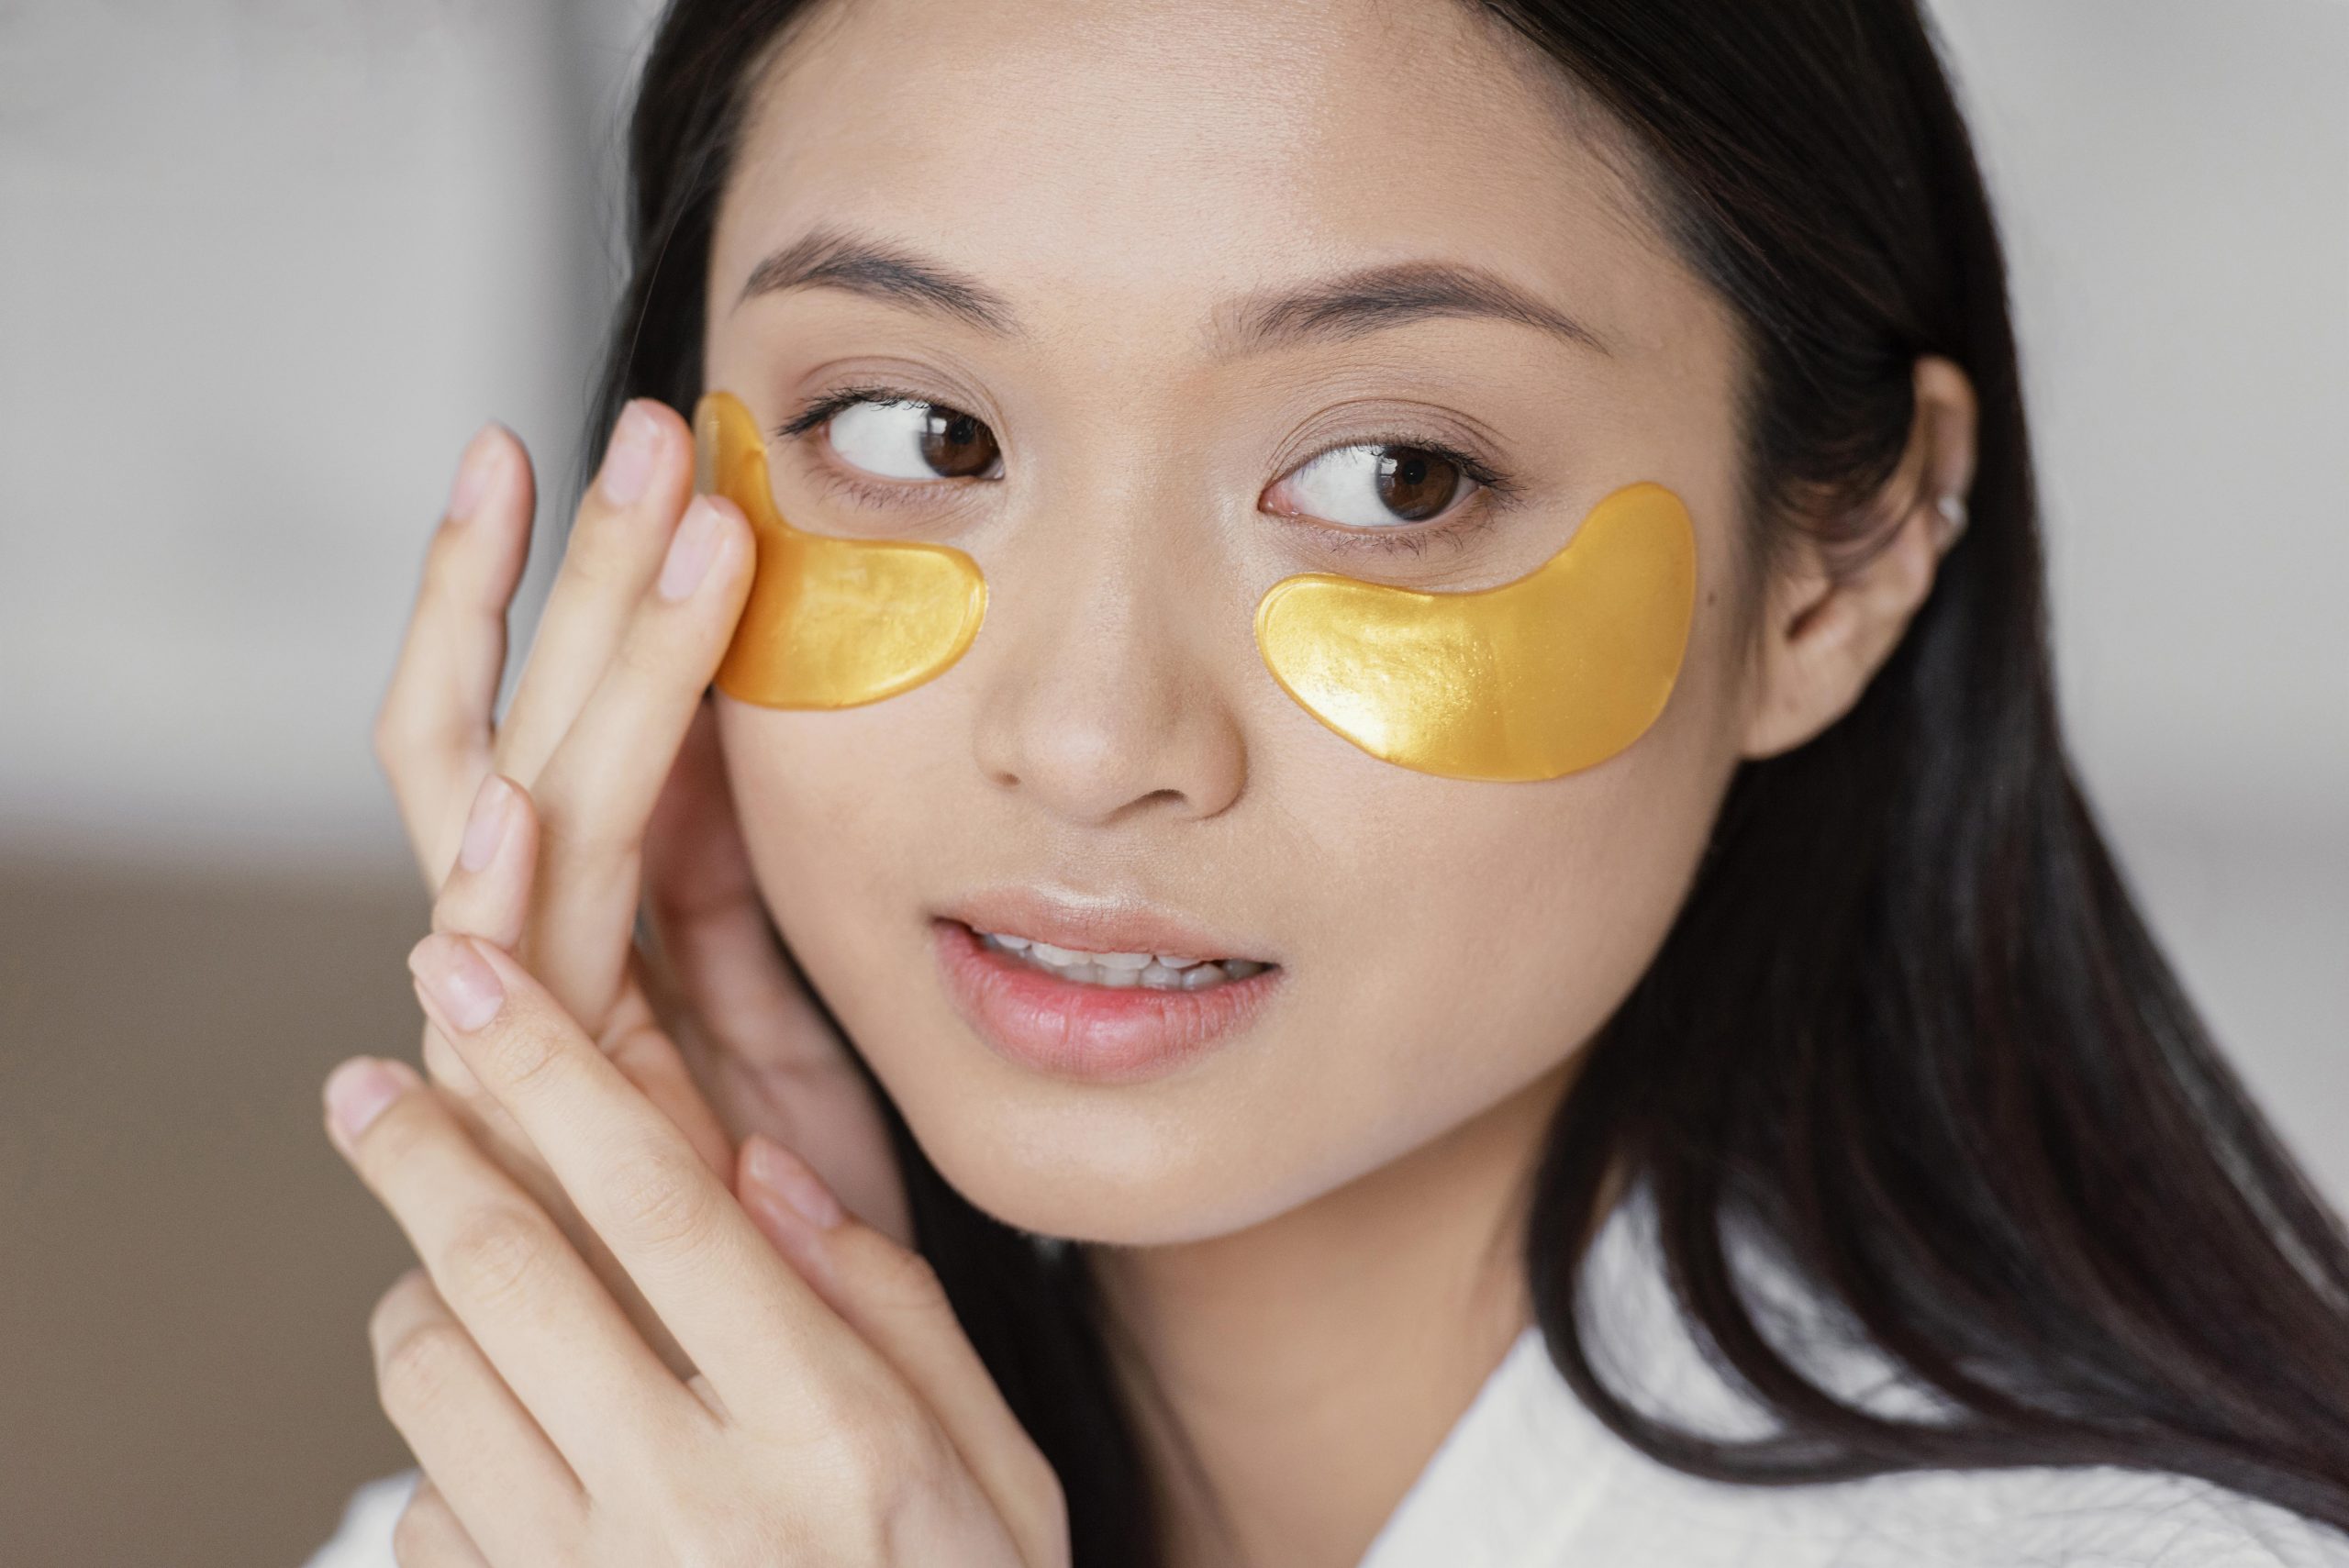 Under-eye patches are perfect solutions for puffy eye and dark circles, making them trending products to sell online.